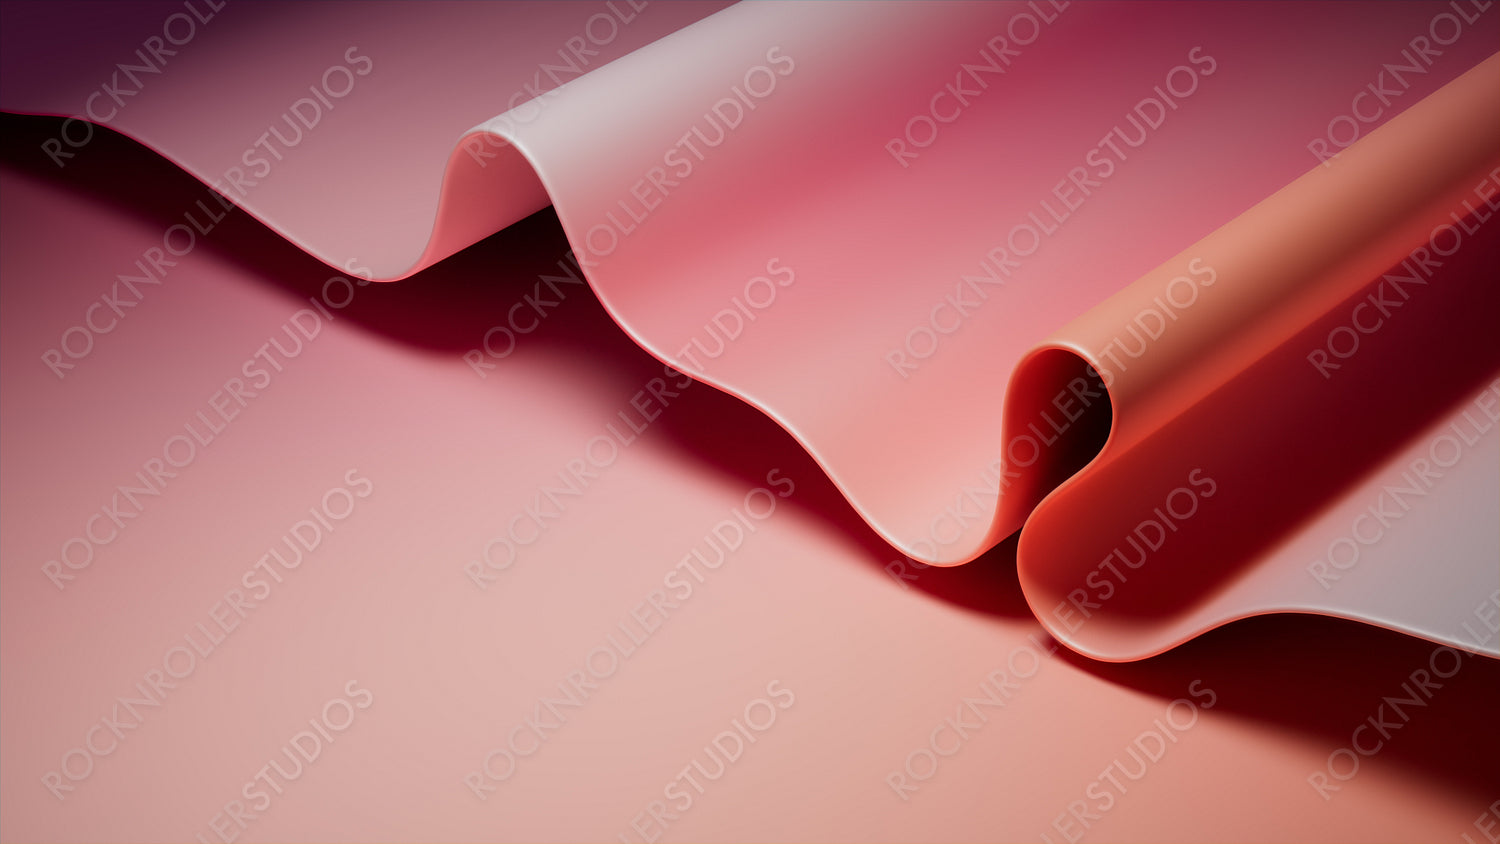 Coral and Pink Ripple Wallpaper. Trendy 3D Gradient Background with Copy-Space.